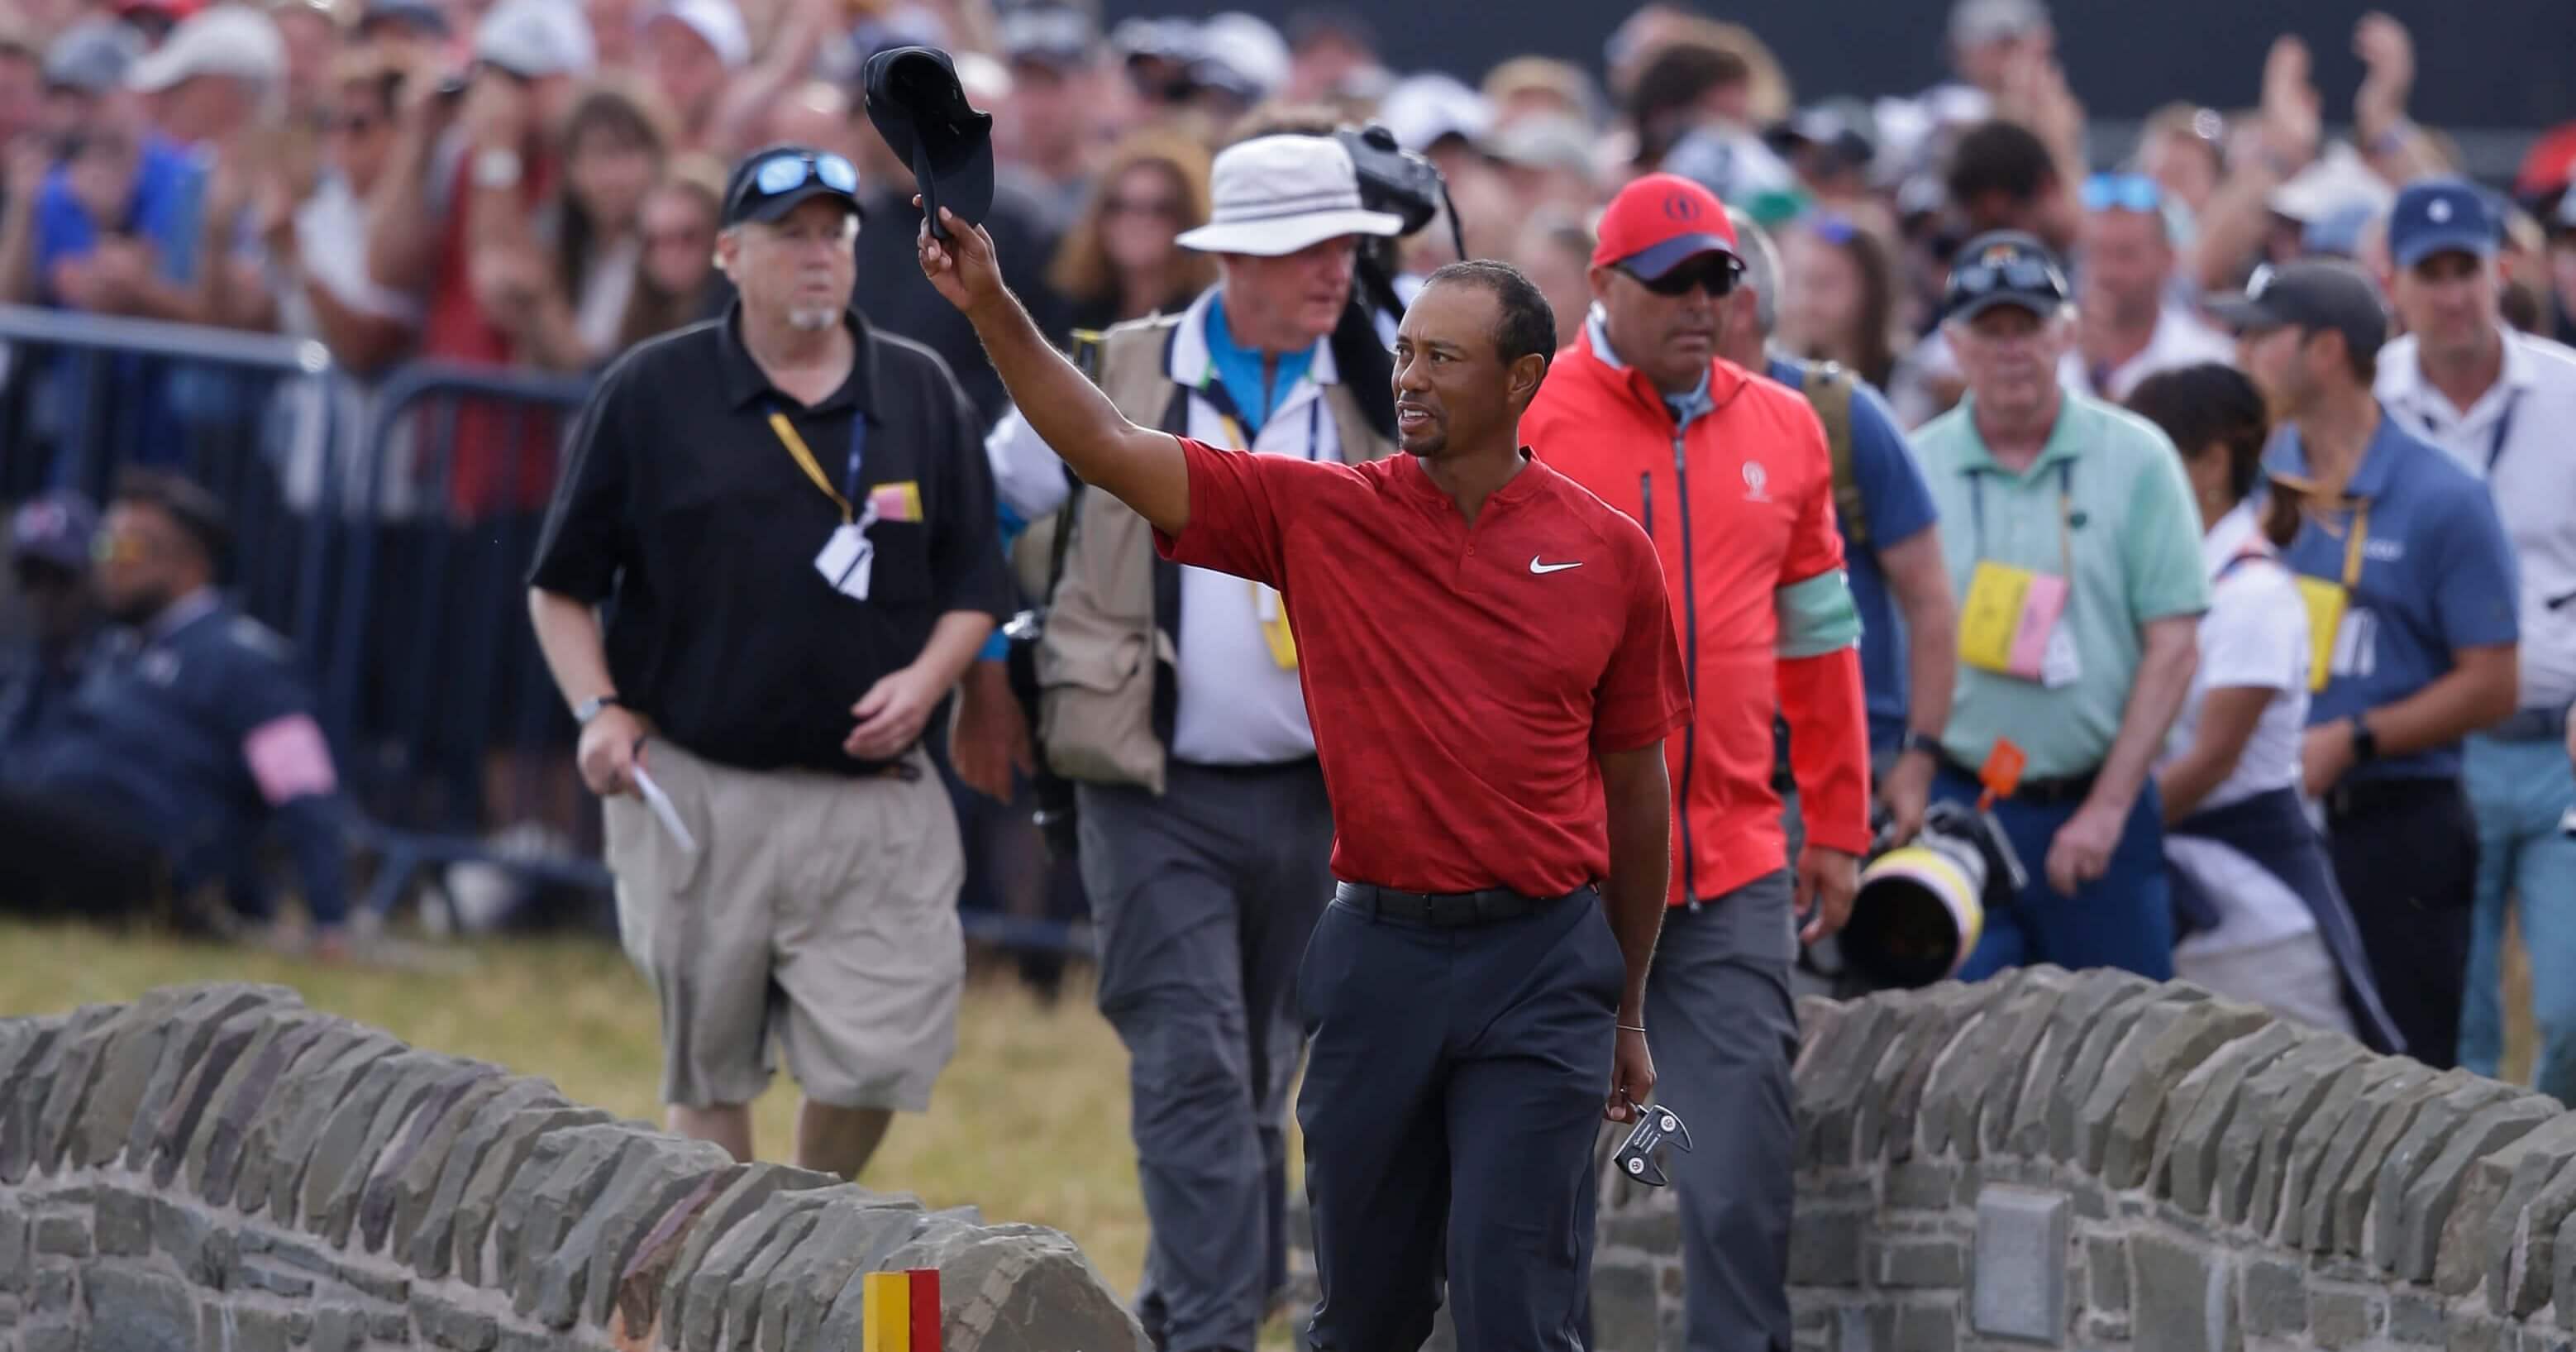 Tiger Woods of the US walks onto the 18th green during the final round for the 147th British Open Golf championships in Carnoustie, Scotland,